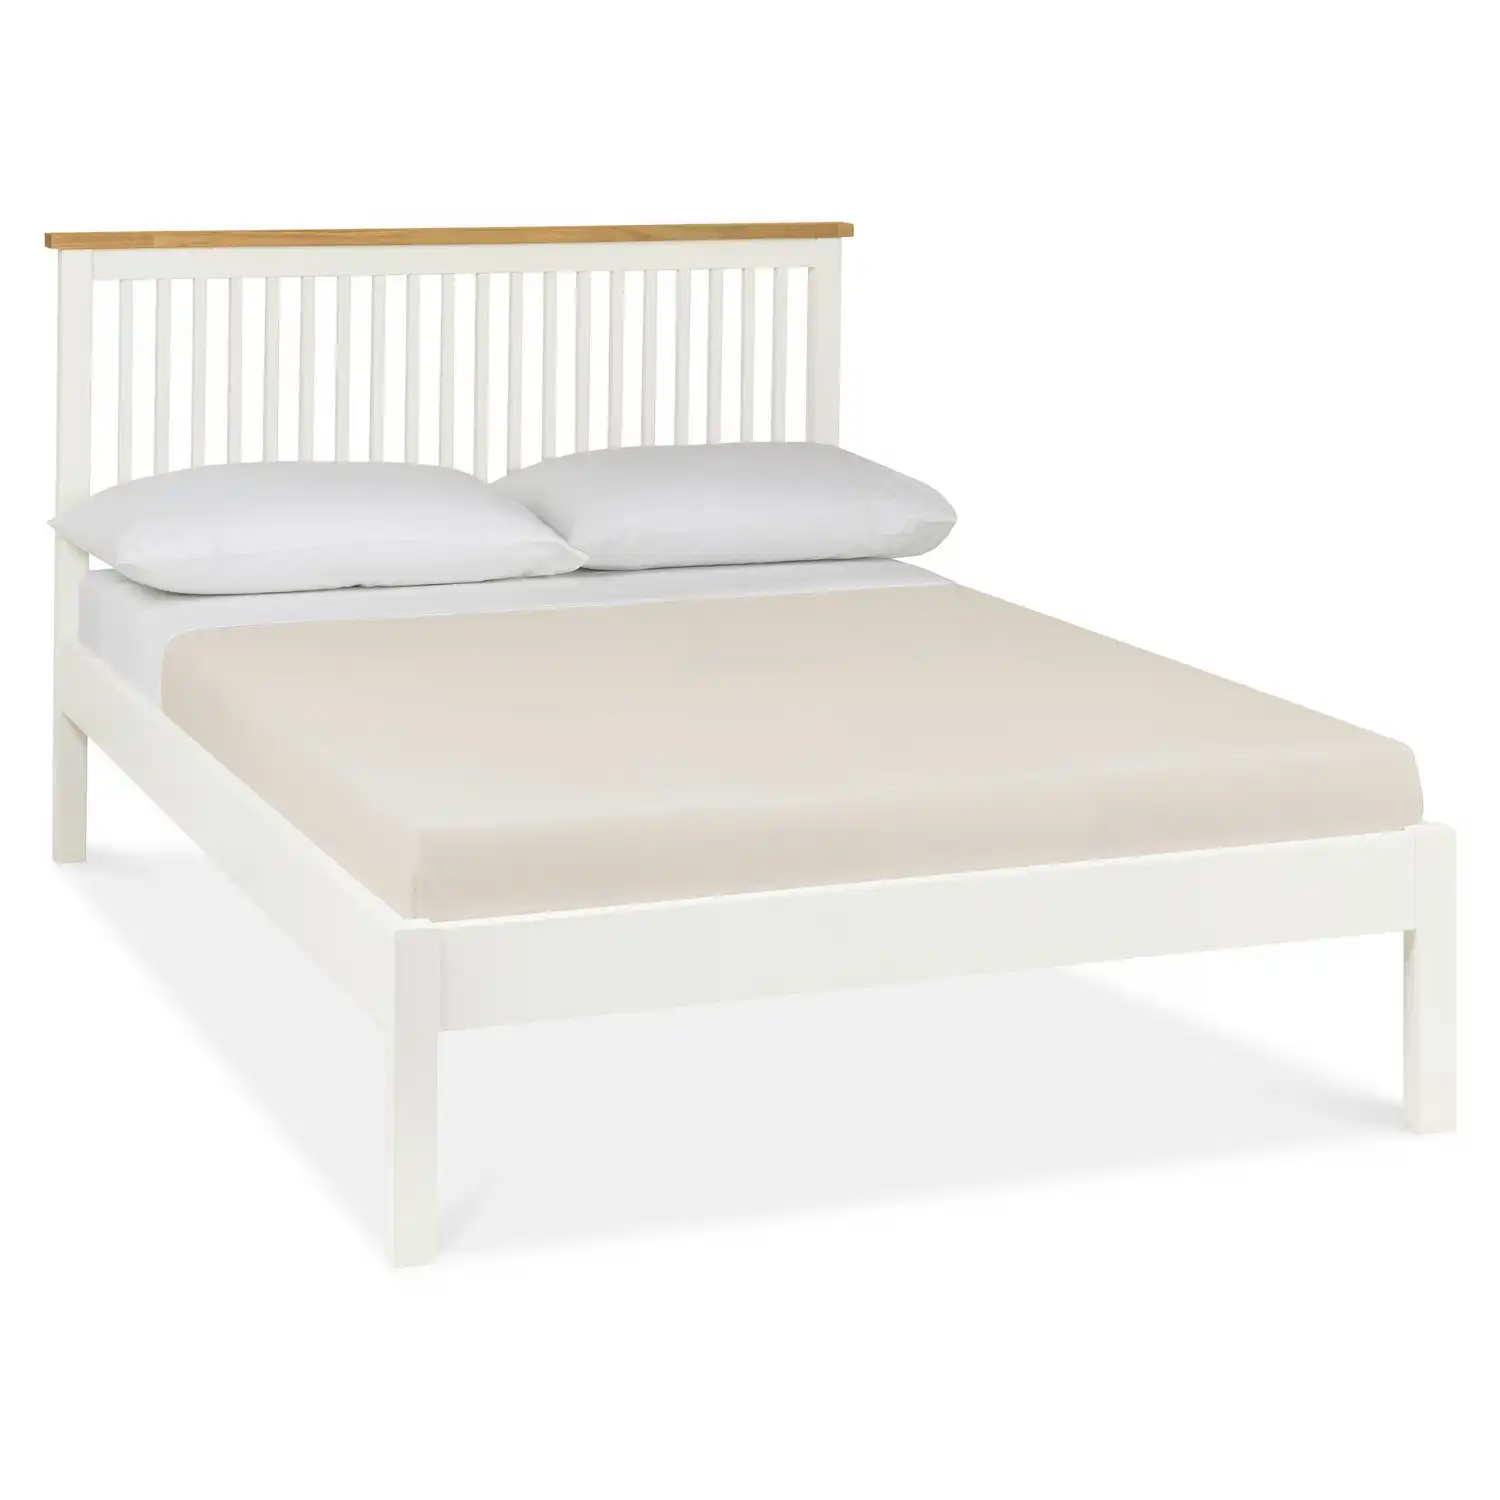 2 Tone White Painted Oak Top Low 5ft King Size Bed